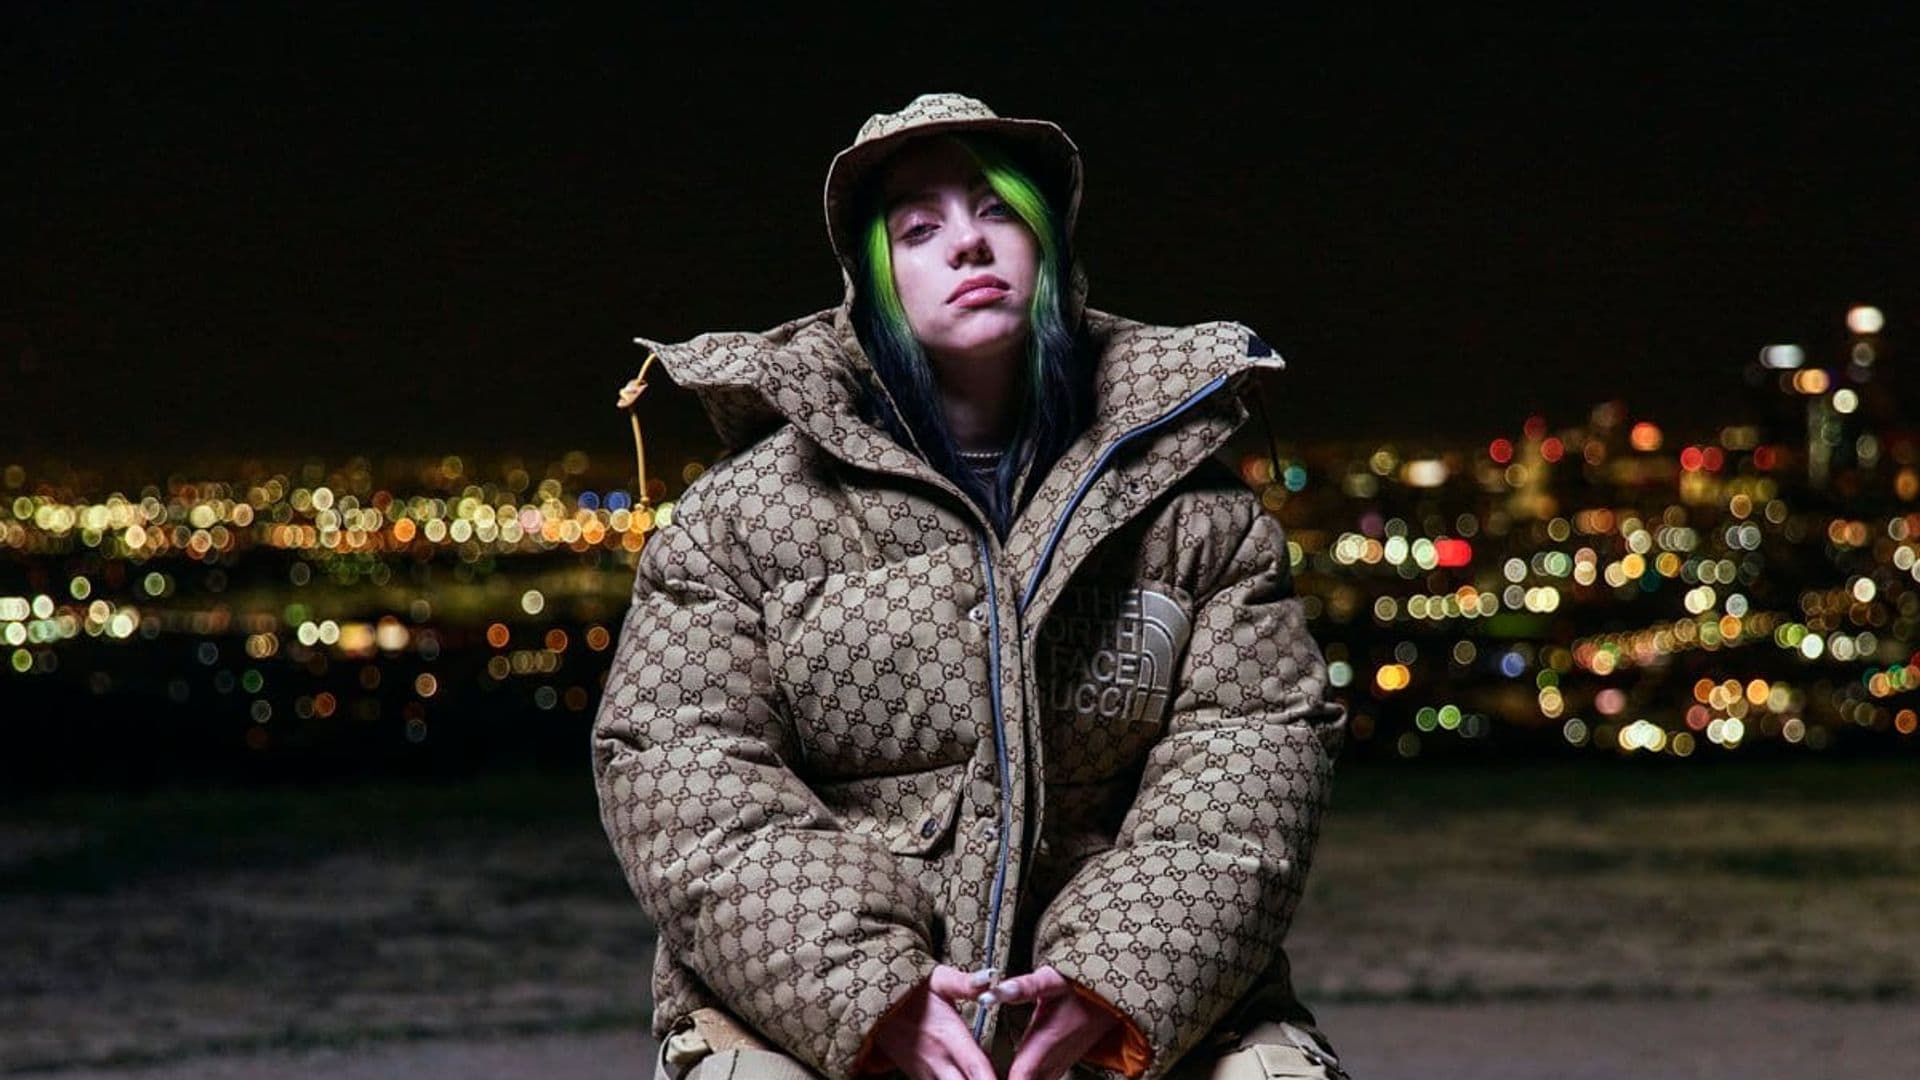 Billie Eilish’s new documentary revealed a lot about the singer and her journey to stardom